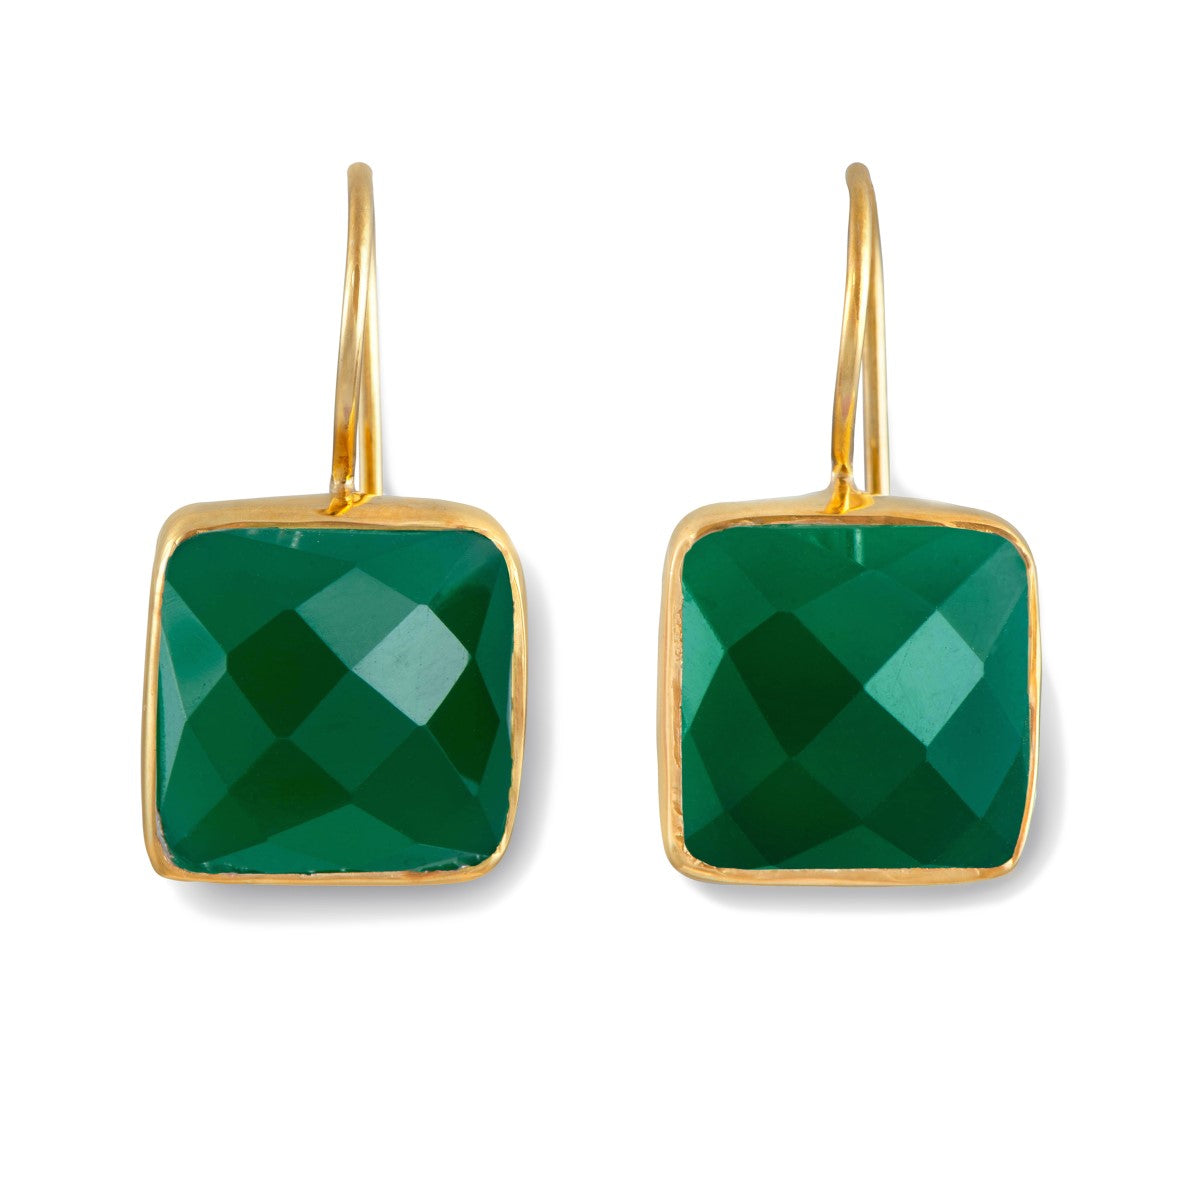 Gold Plated Sterling Silver Square Gemstone Earrings - Green Onyx